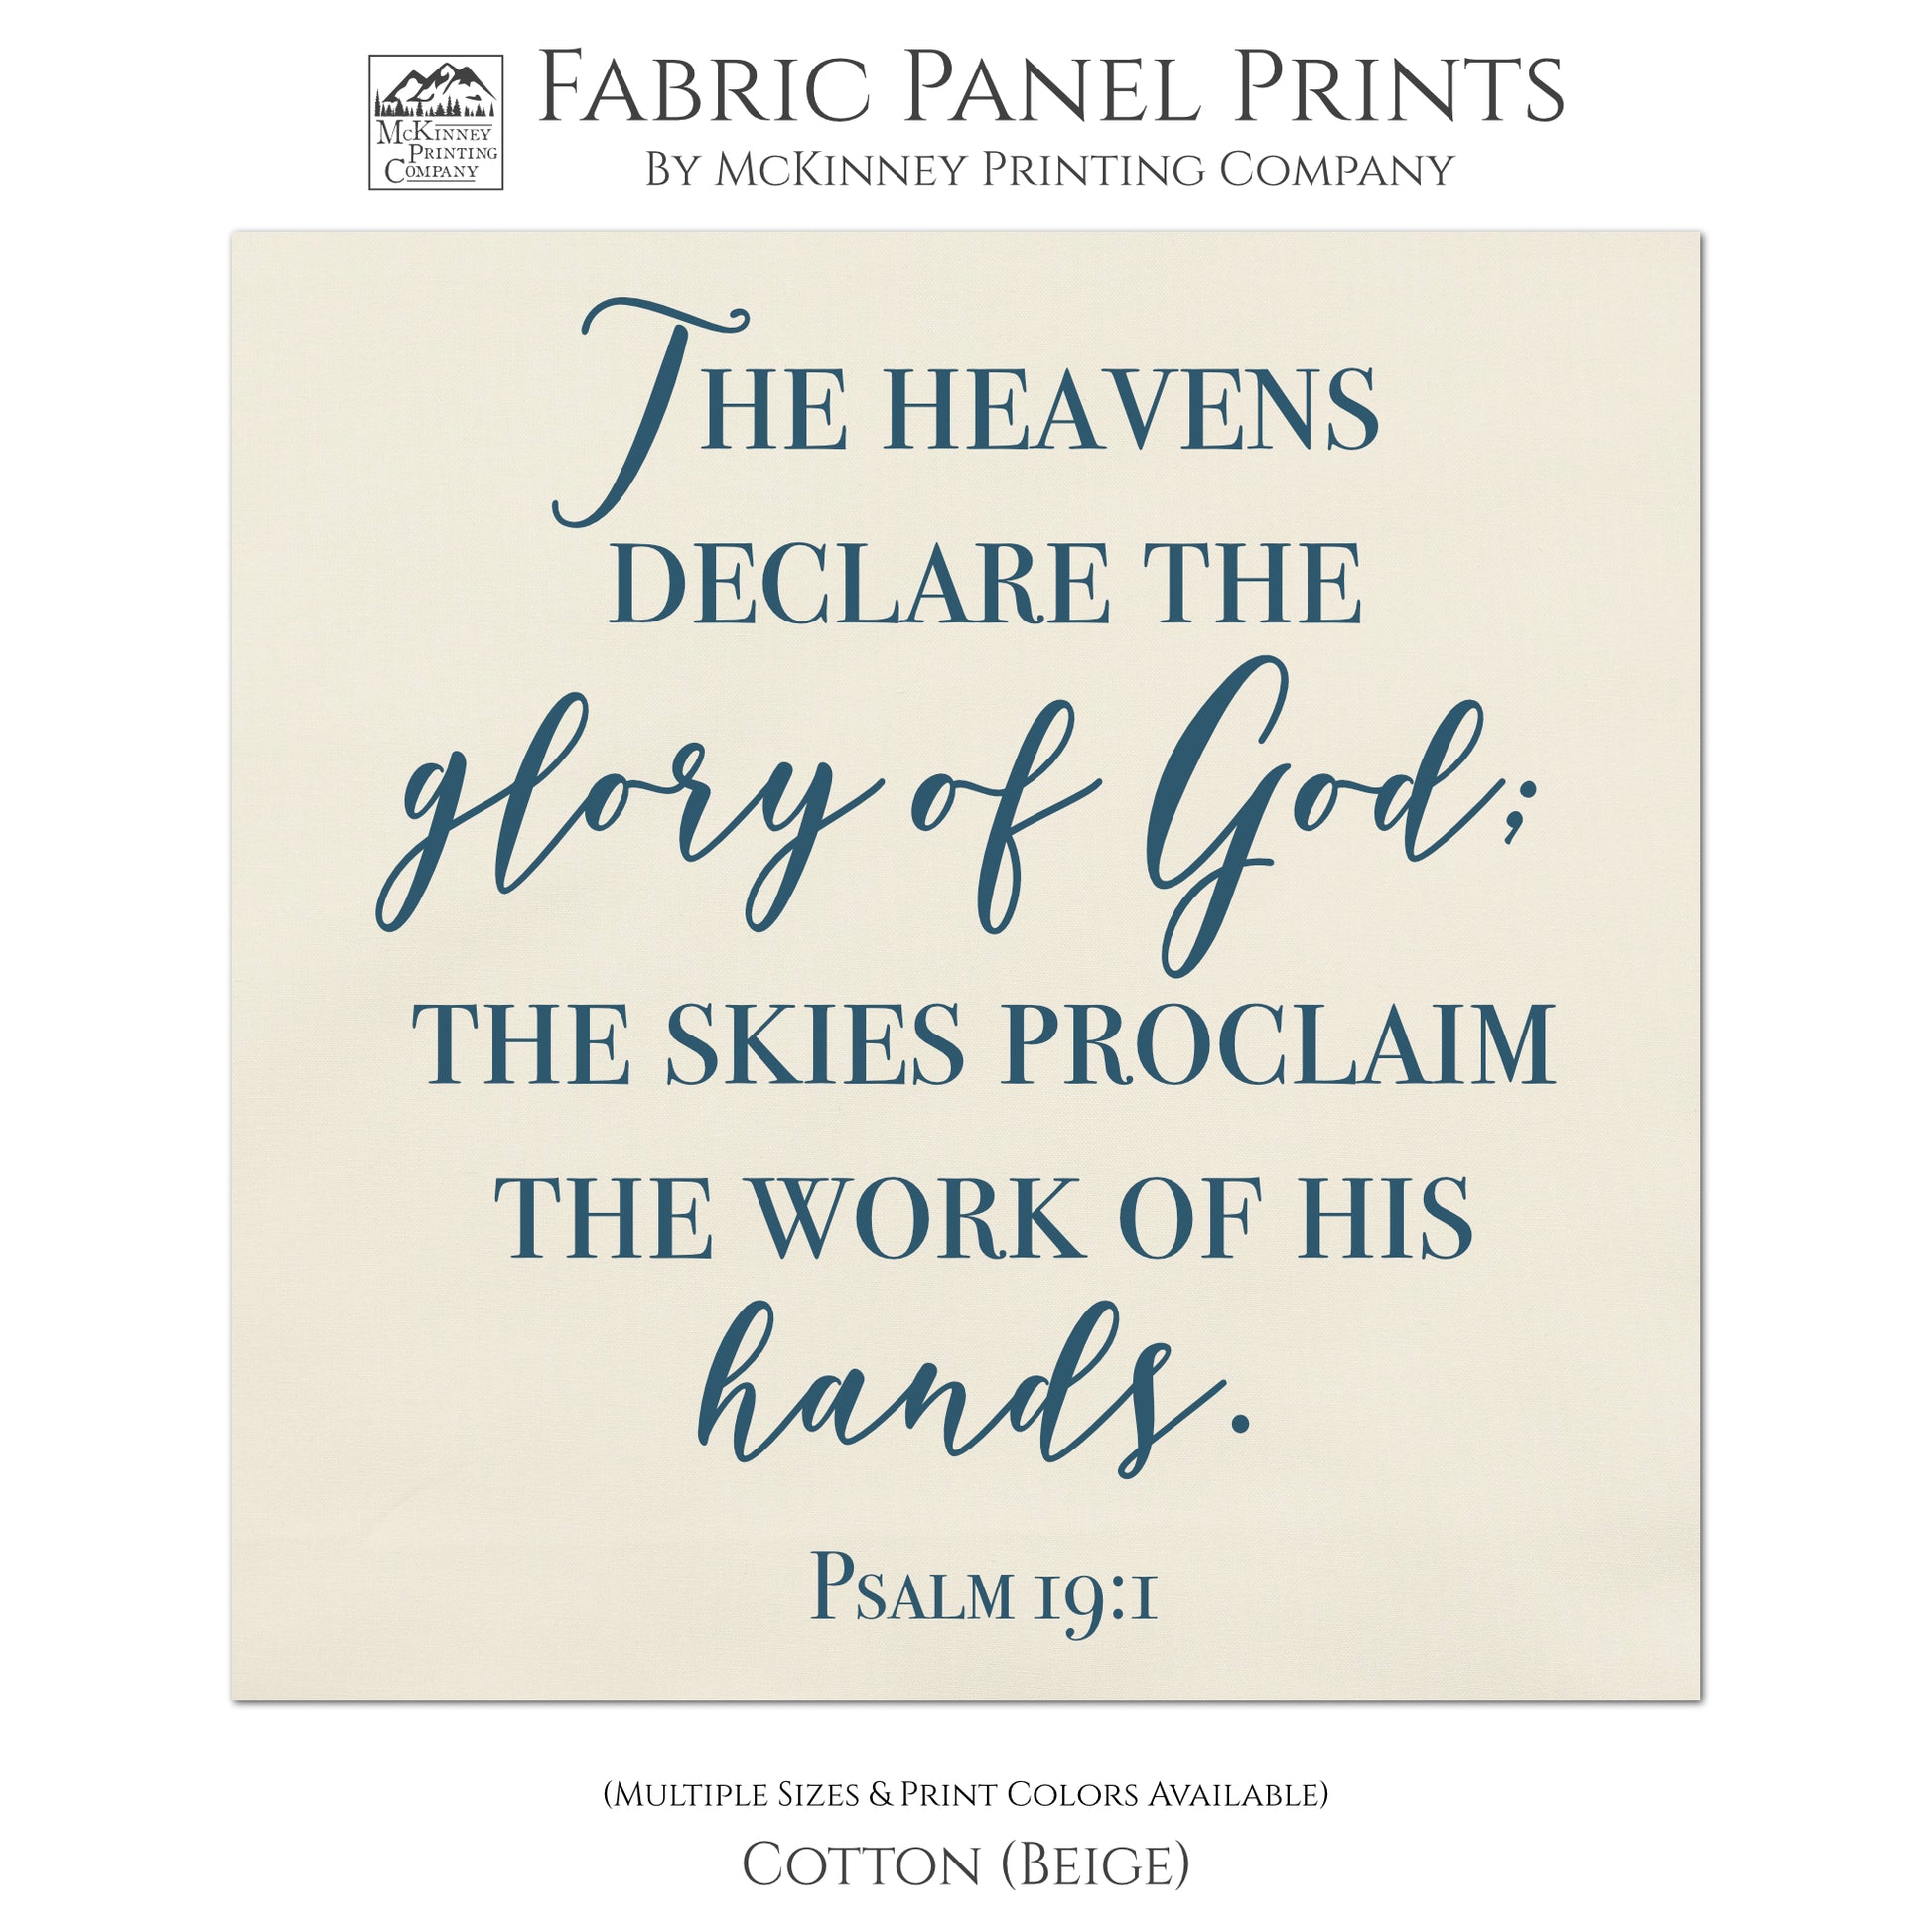 The heavens declare the glory of God; the sky's proclaim the work of his hands - Psalm 19:1 - Religious Cotton Fabric, Large Print Quilt Block - Cotton